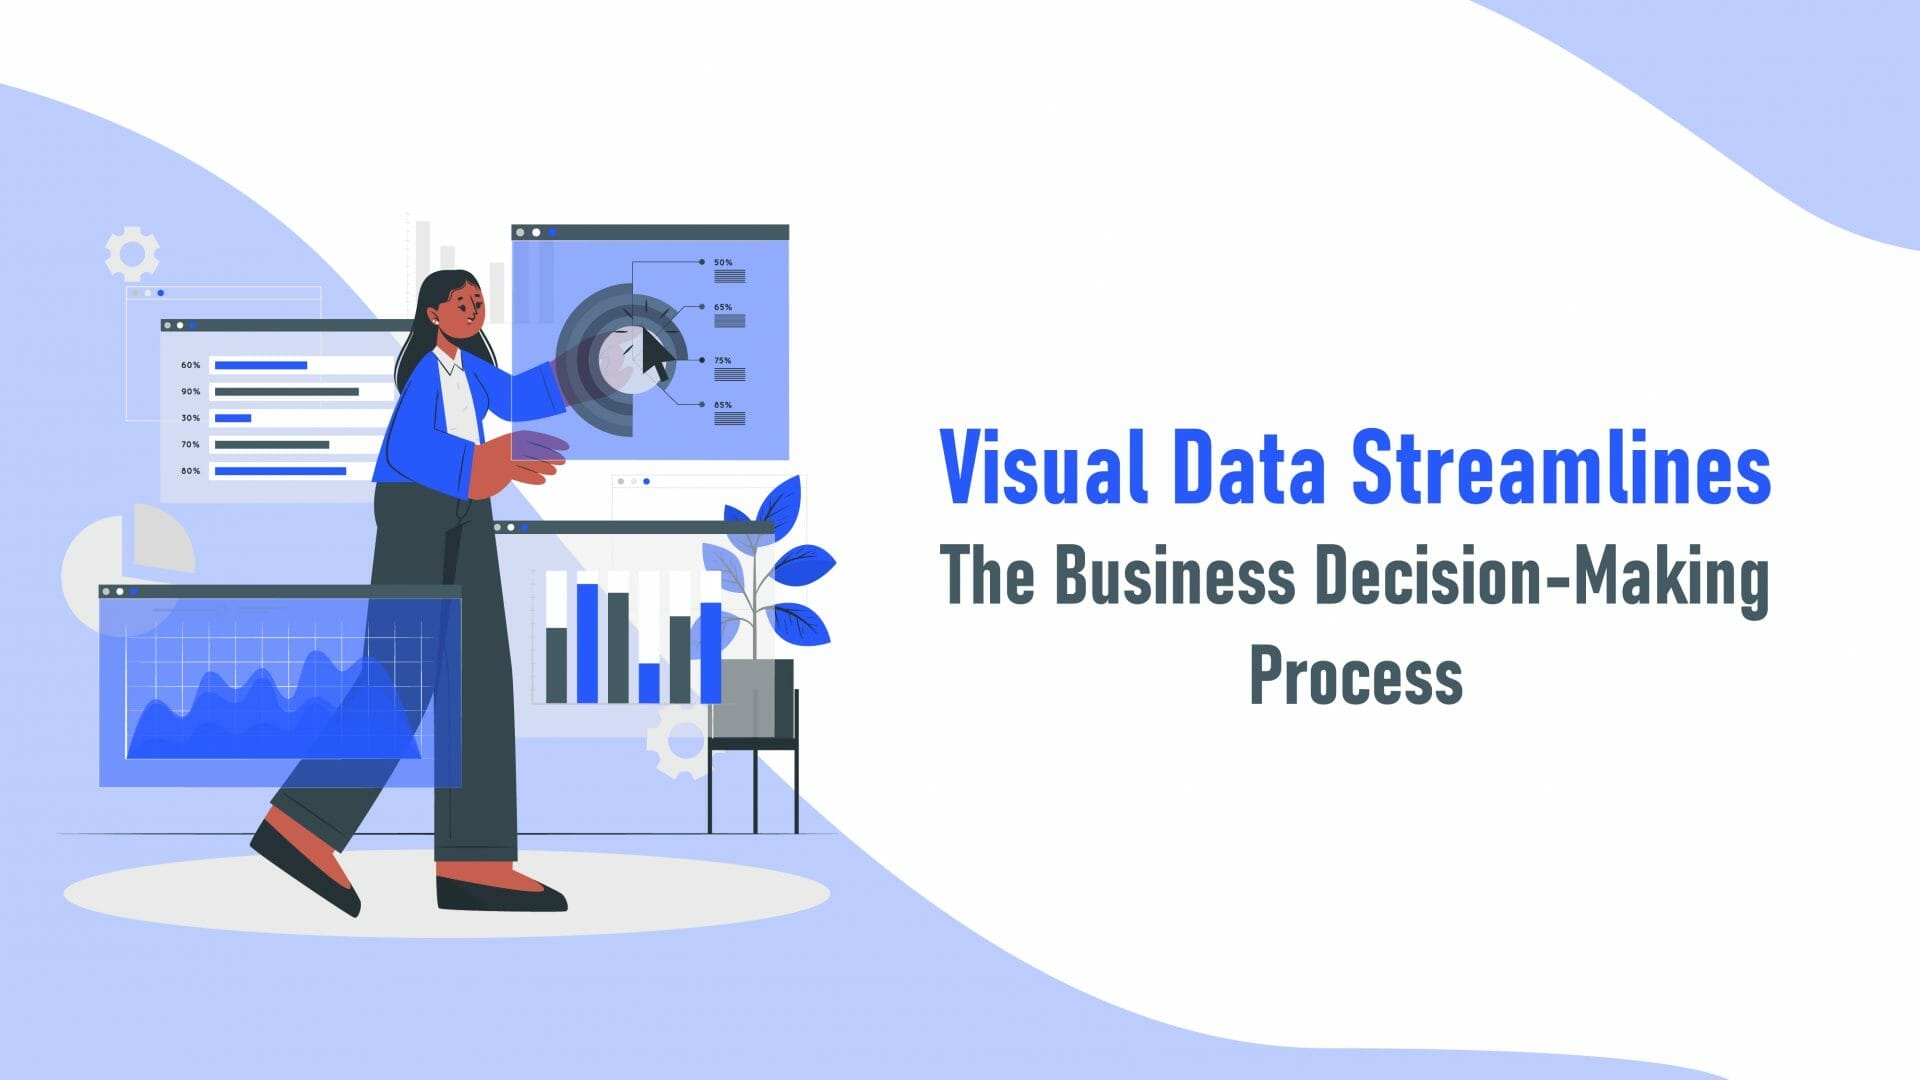 Visual Data Streamlines The Business Decision-Making Process